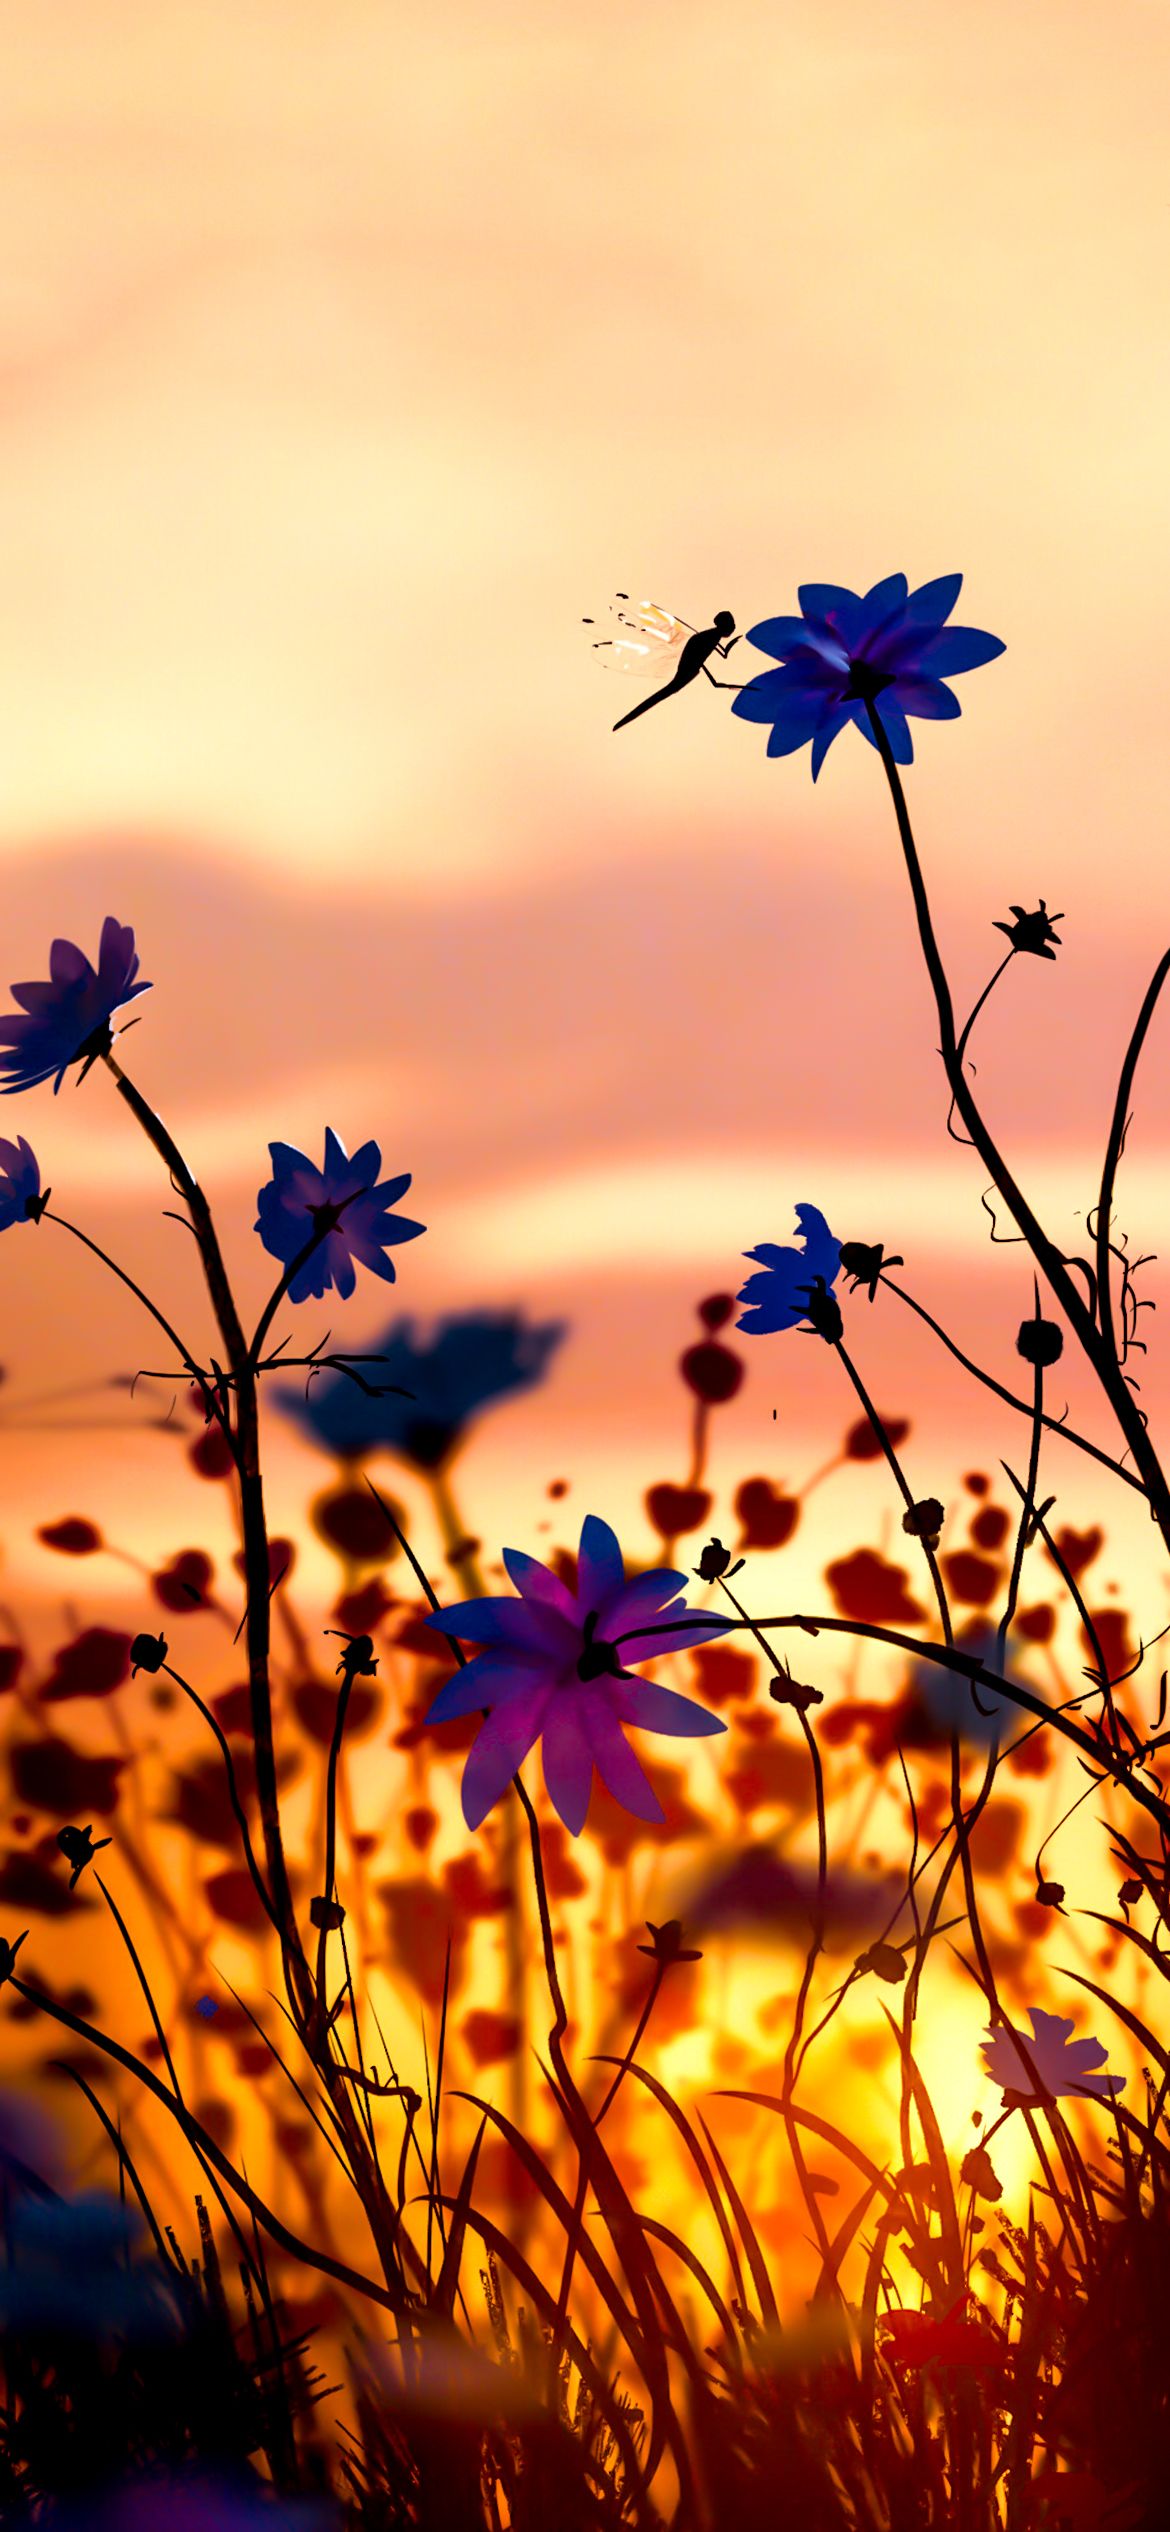 PHONE WALLPAPER SUNSET AND FLOWERS